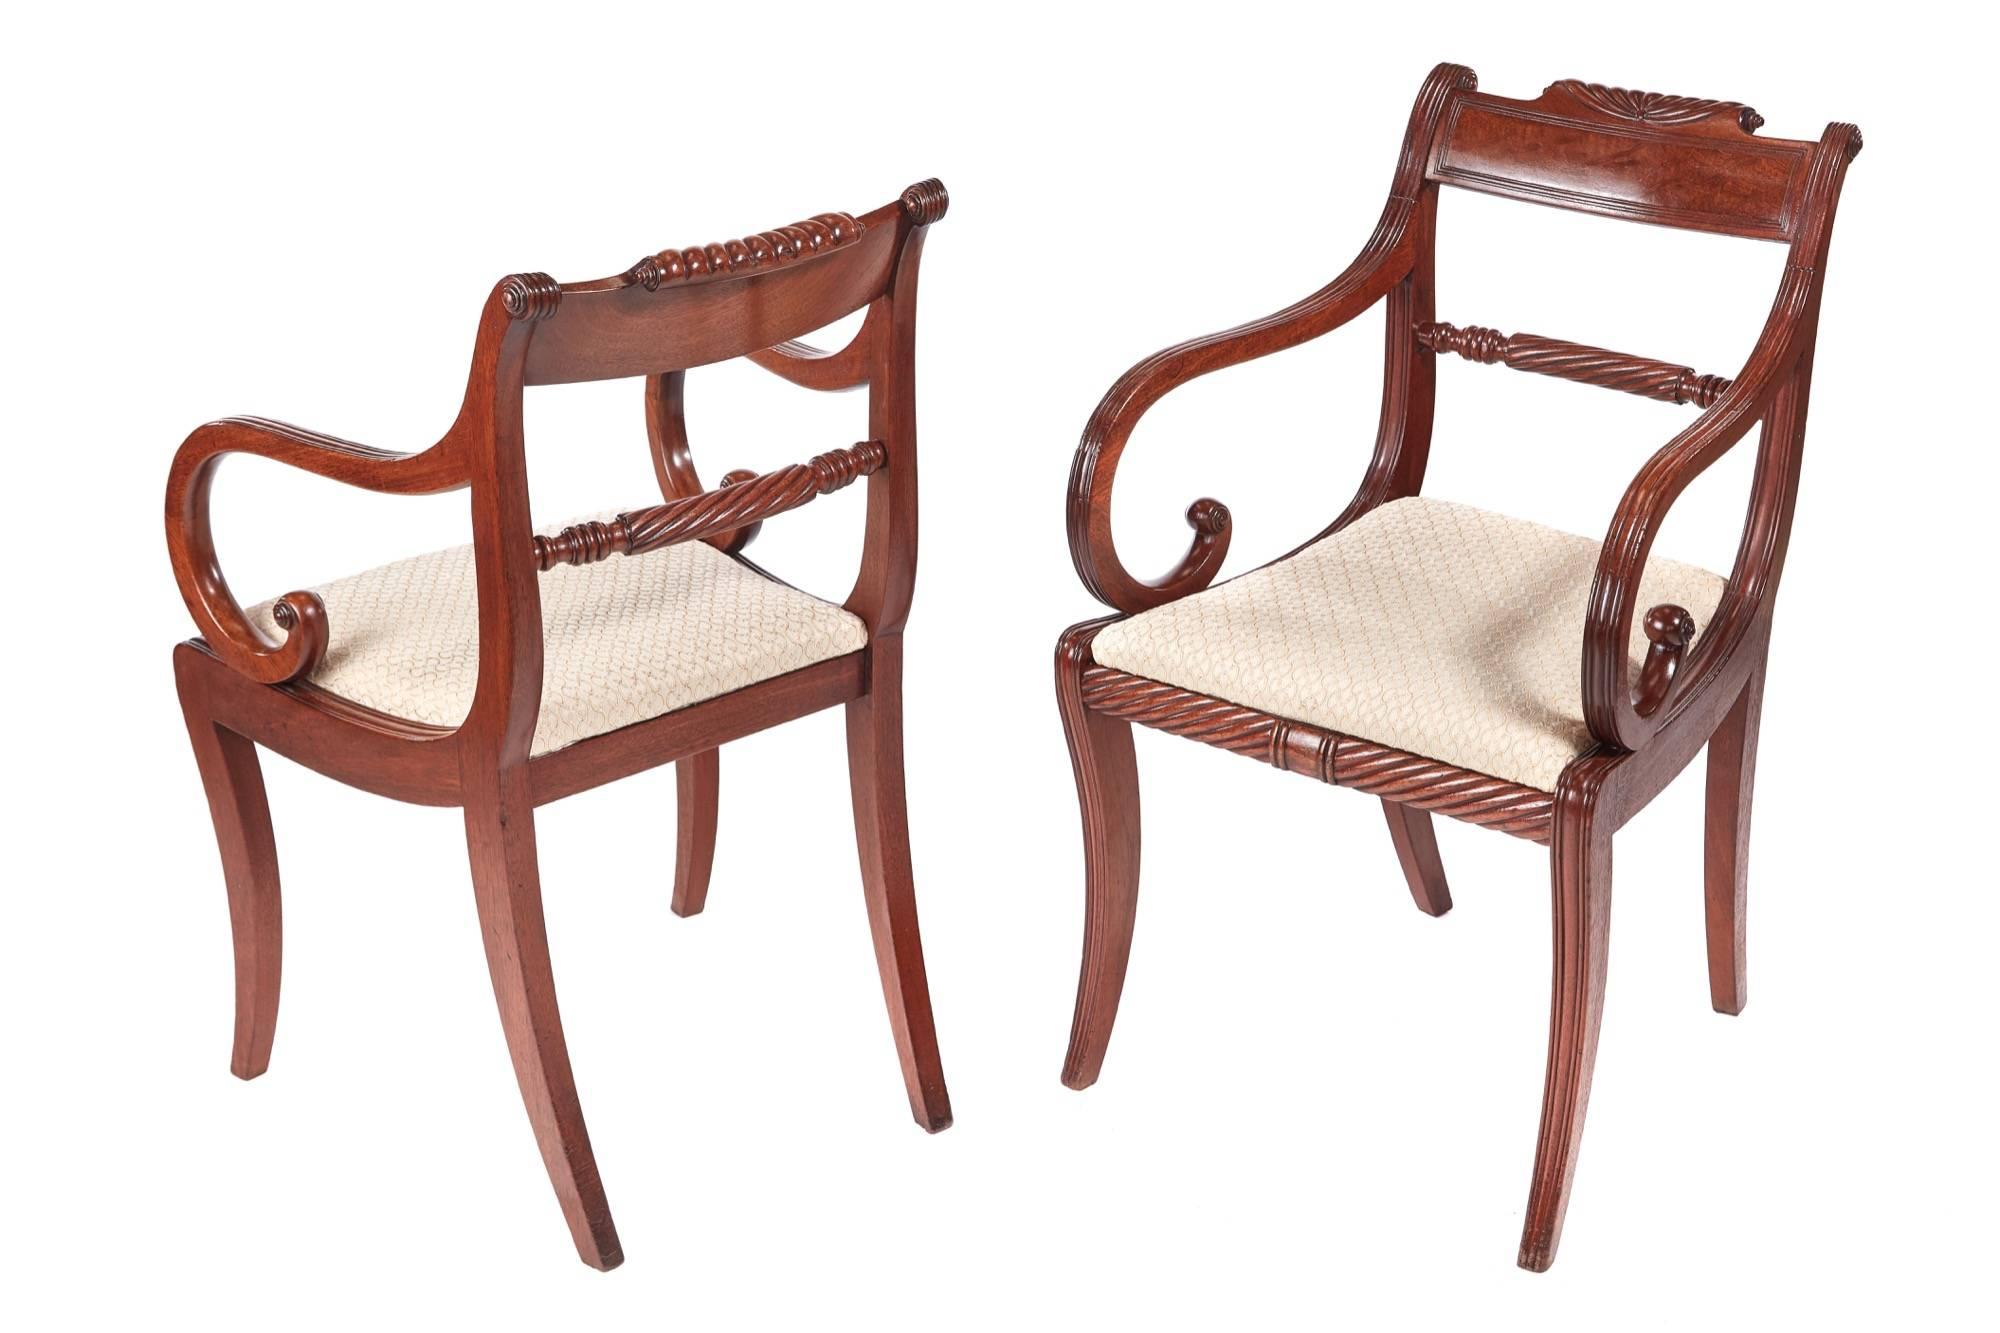 Fine set of six antique regency mahogany dining chairs, consist of two carver chairs and four single chairs with a shaped carved and reeded top rail, lovely rope twist centre rail, the carver chairs having lovely shaped scroll arms, newly recovered